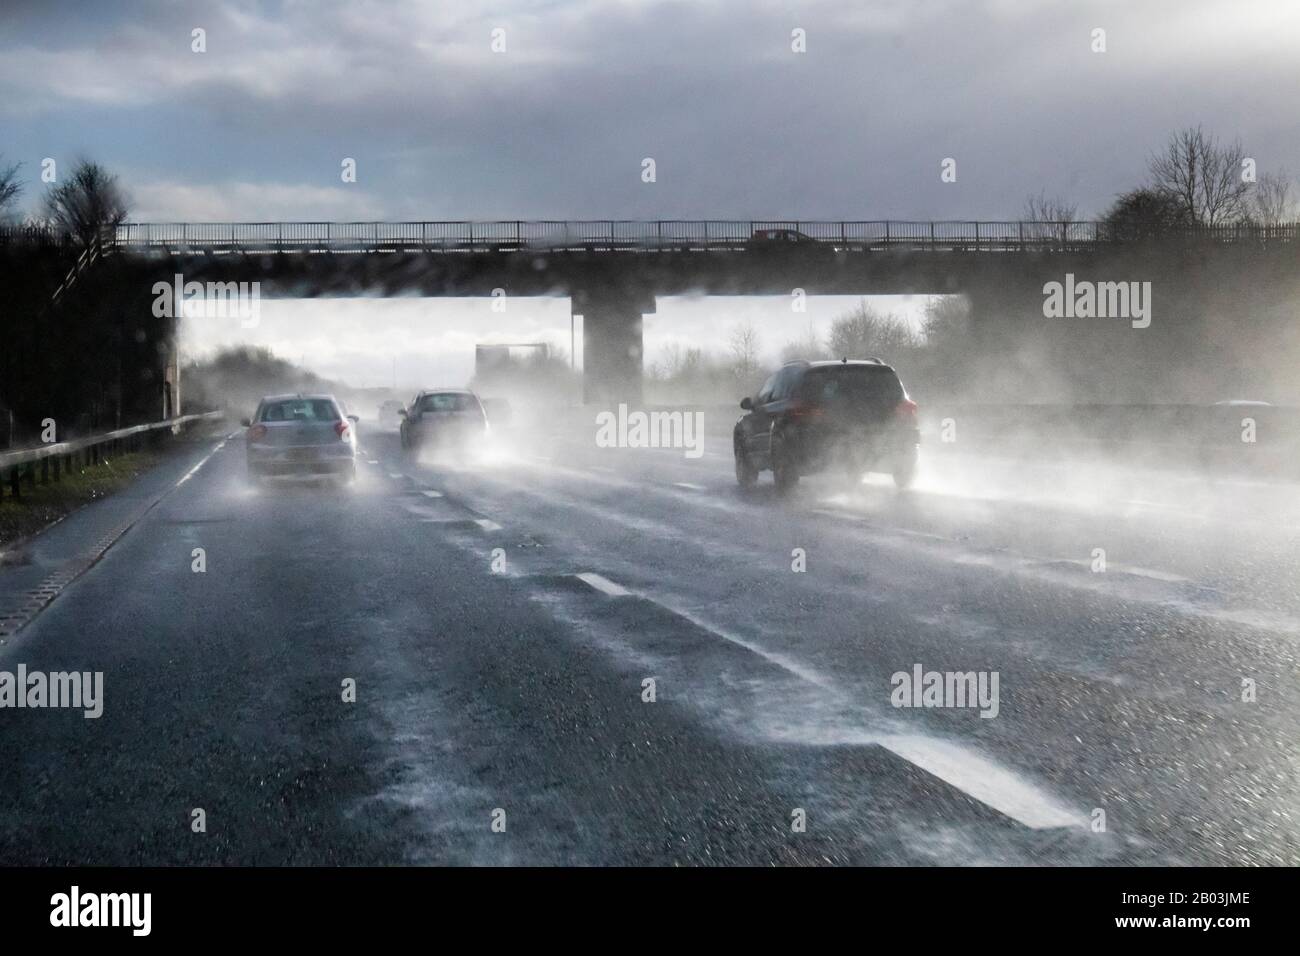 A passenger's view of the poor driving conditions driving south on the M! motorway in Derbyshire UK during Storm Dennis on 16/2/2020. Stock Photo